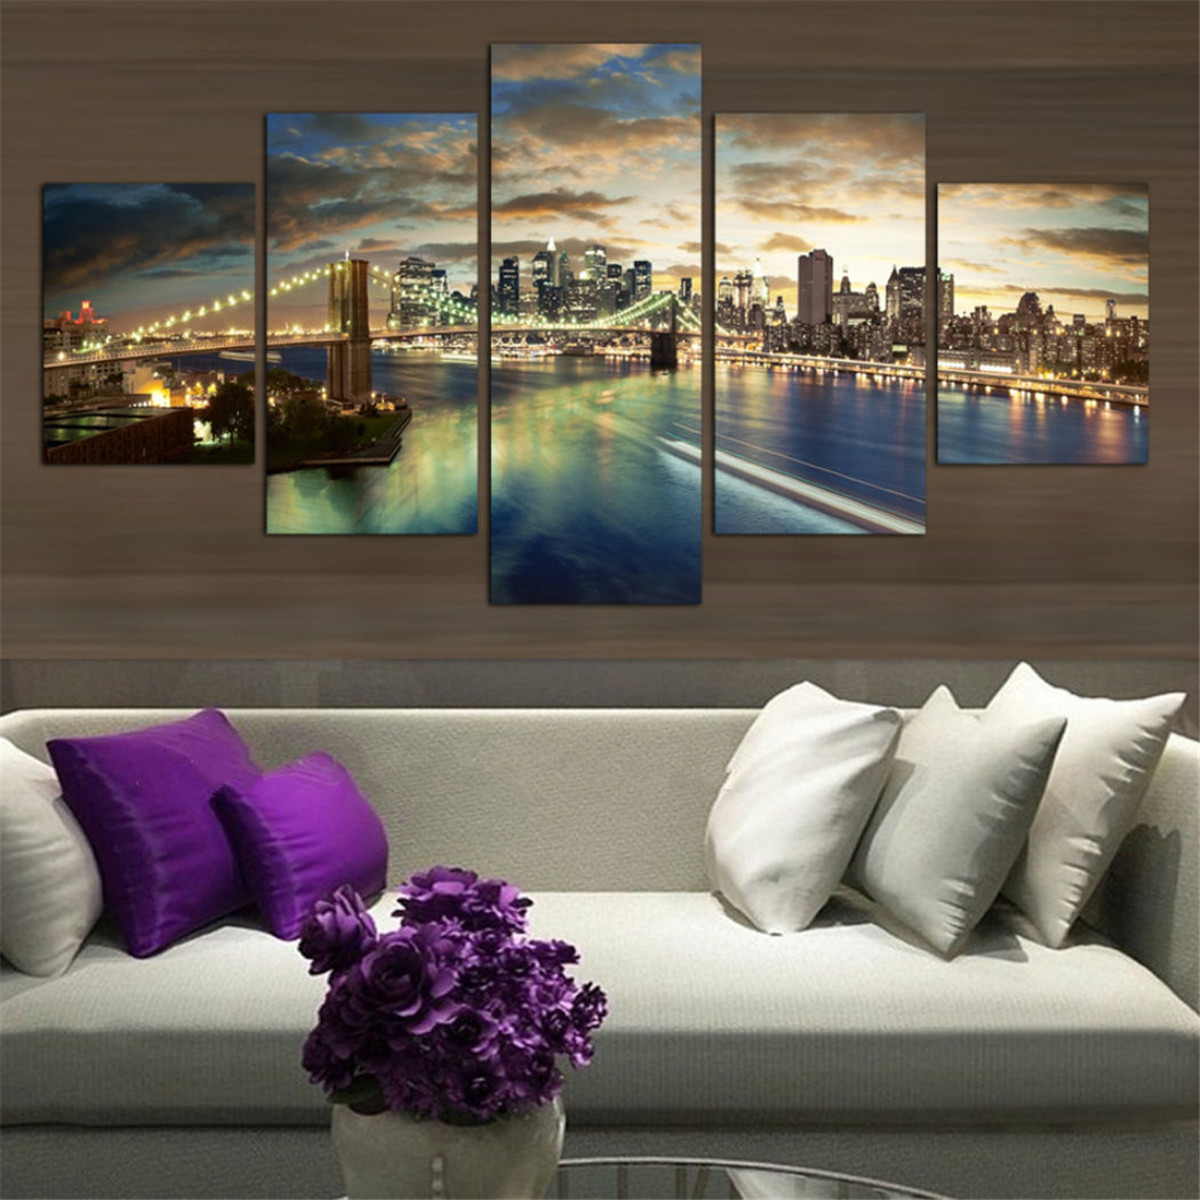 5-Pcs-Wall-Decorative-Painting-New-York-City-at-Night-Wall-Decor-Art-Pictures-Canvas-Prints-Home-Off-1724152-2